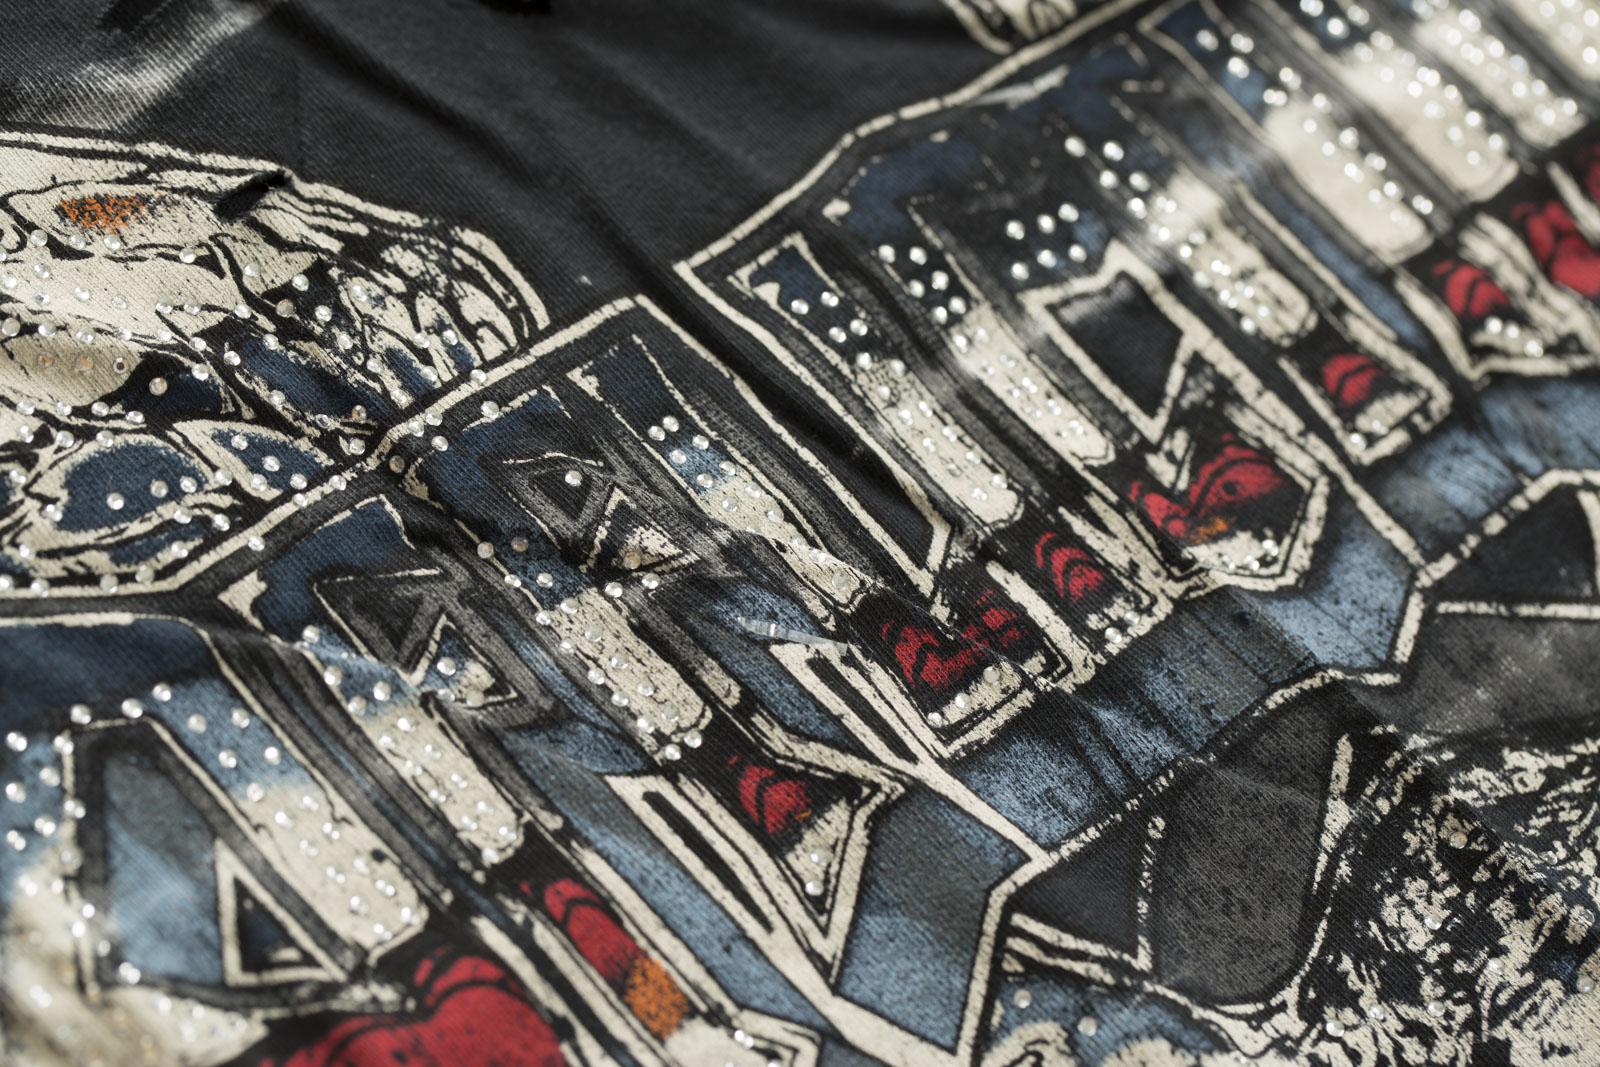 Affliction T-Shirt AC Roadie featuring a large bird of prey